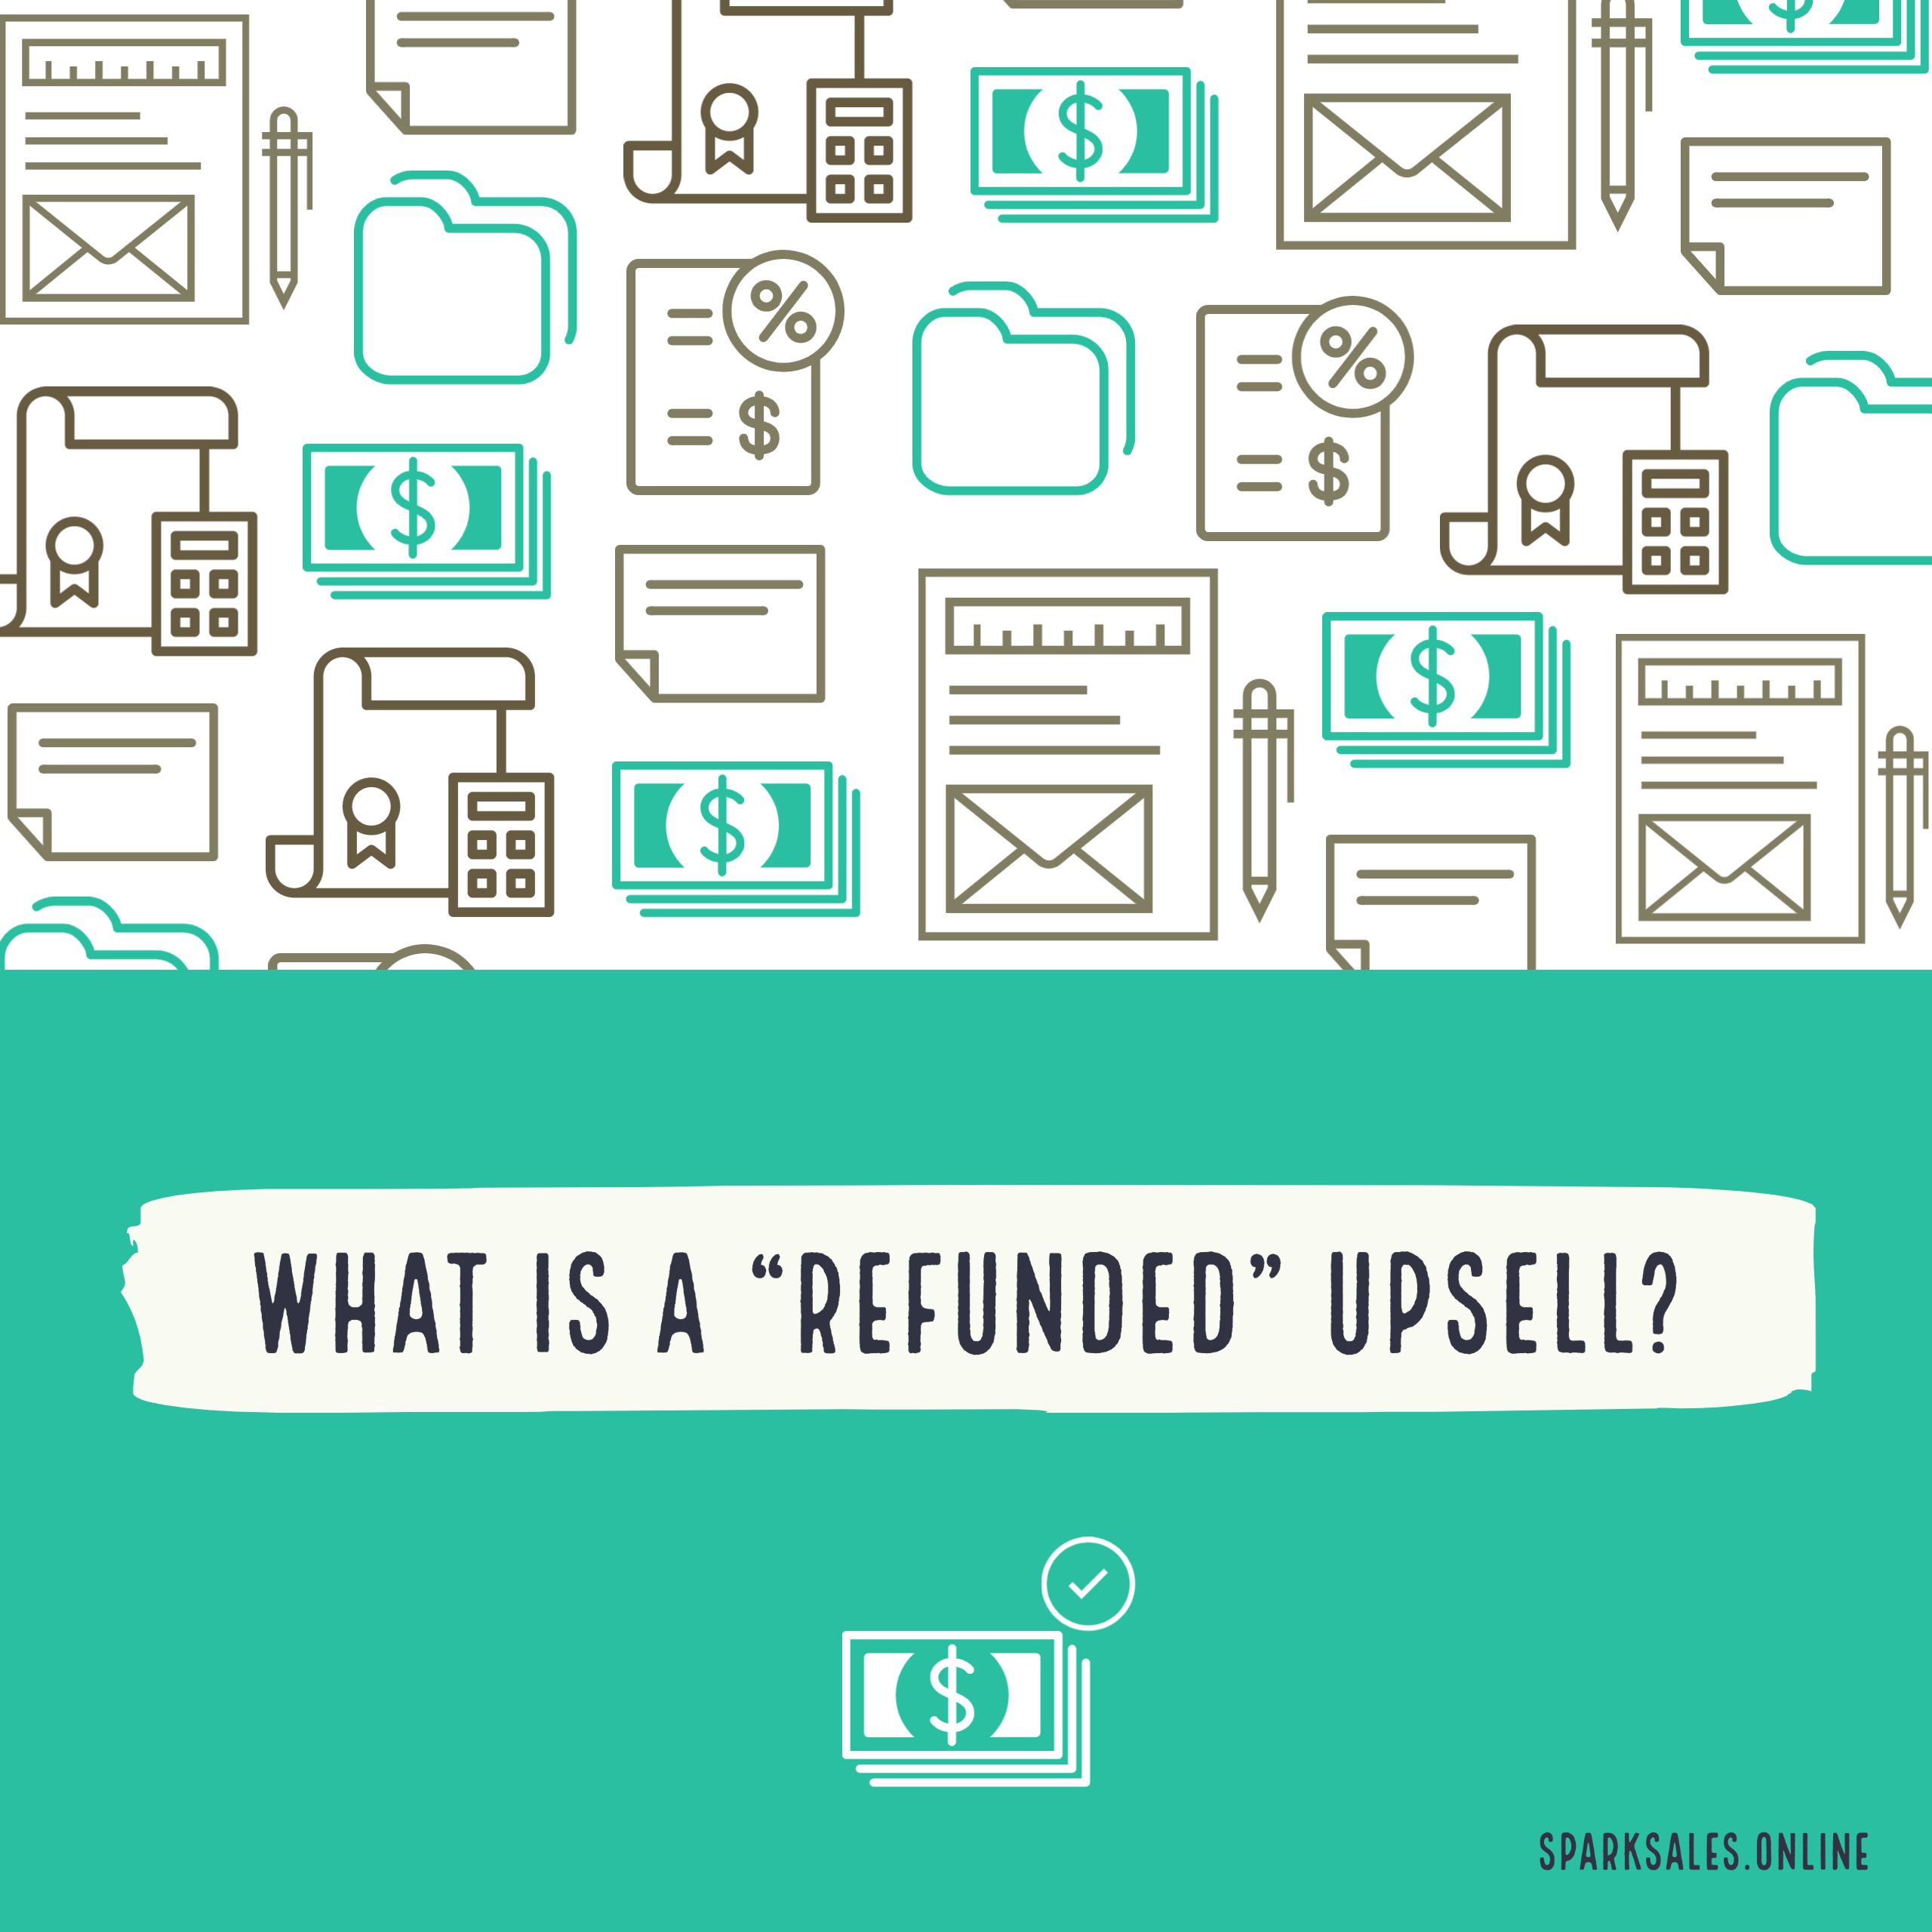 What is a refunded upsell?